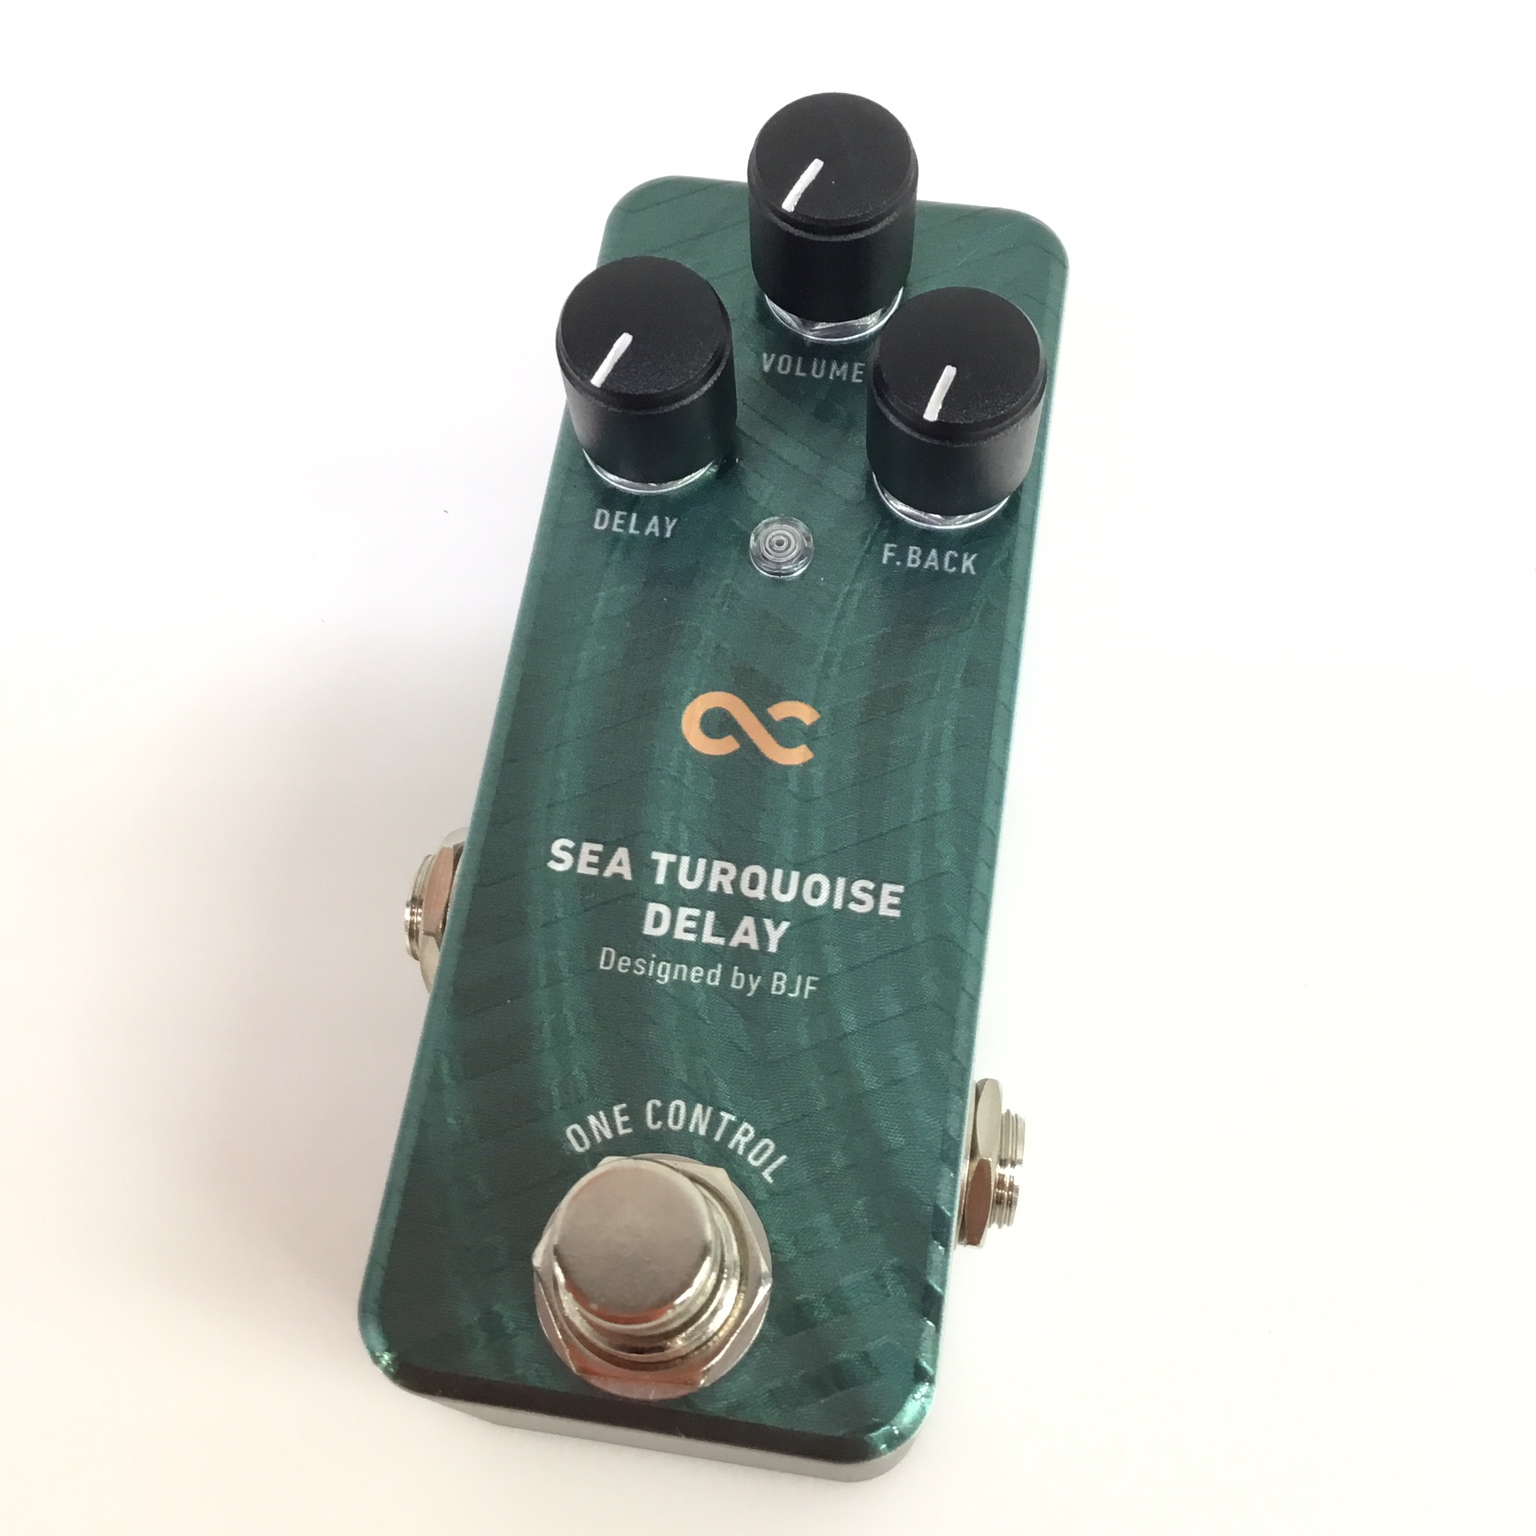 ONECONTROL　ワンコントロール　SEA TURQUOISE DELAY